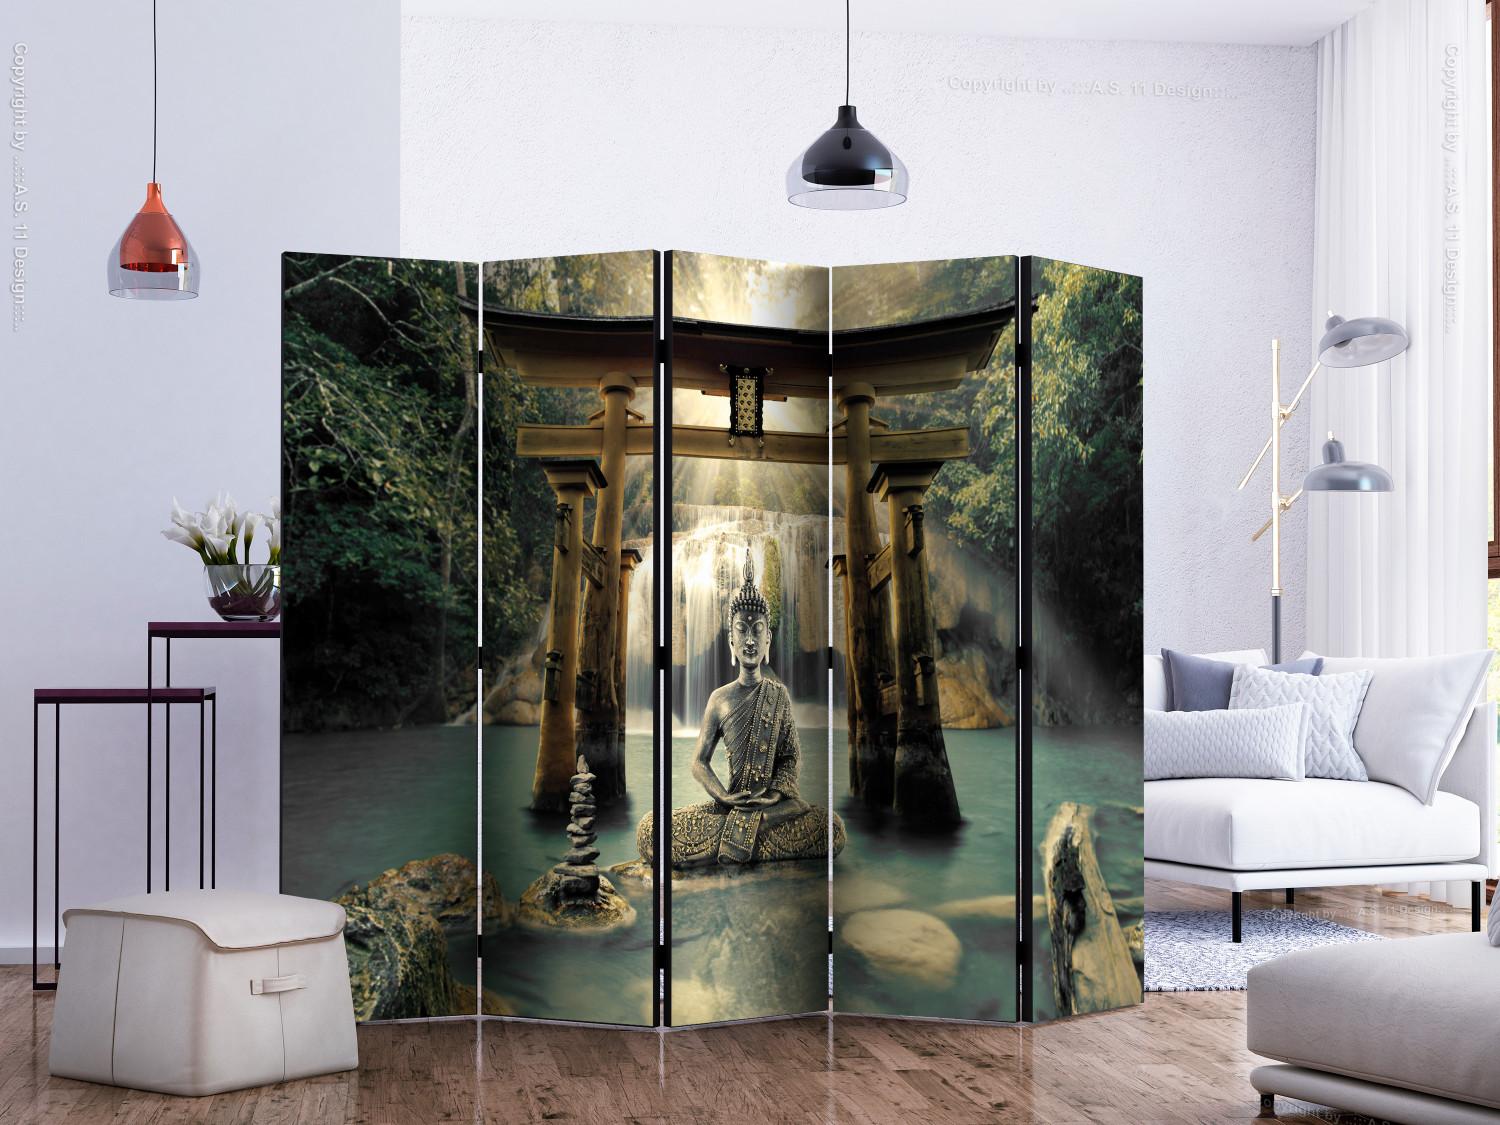 Room Divider Buddha's Smile II (5-piece) - statue against a waterfall in zen style